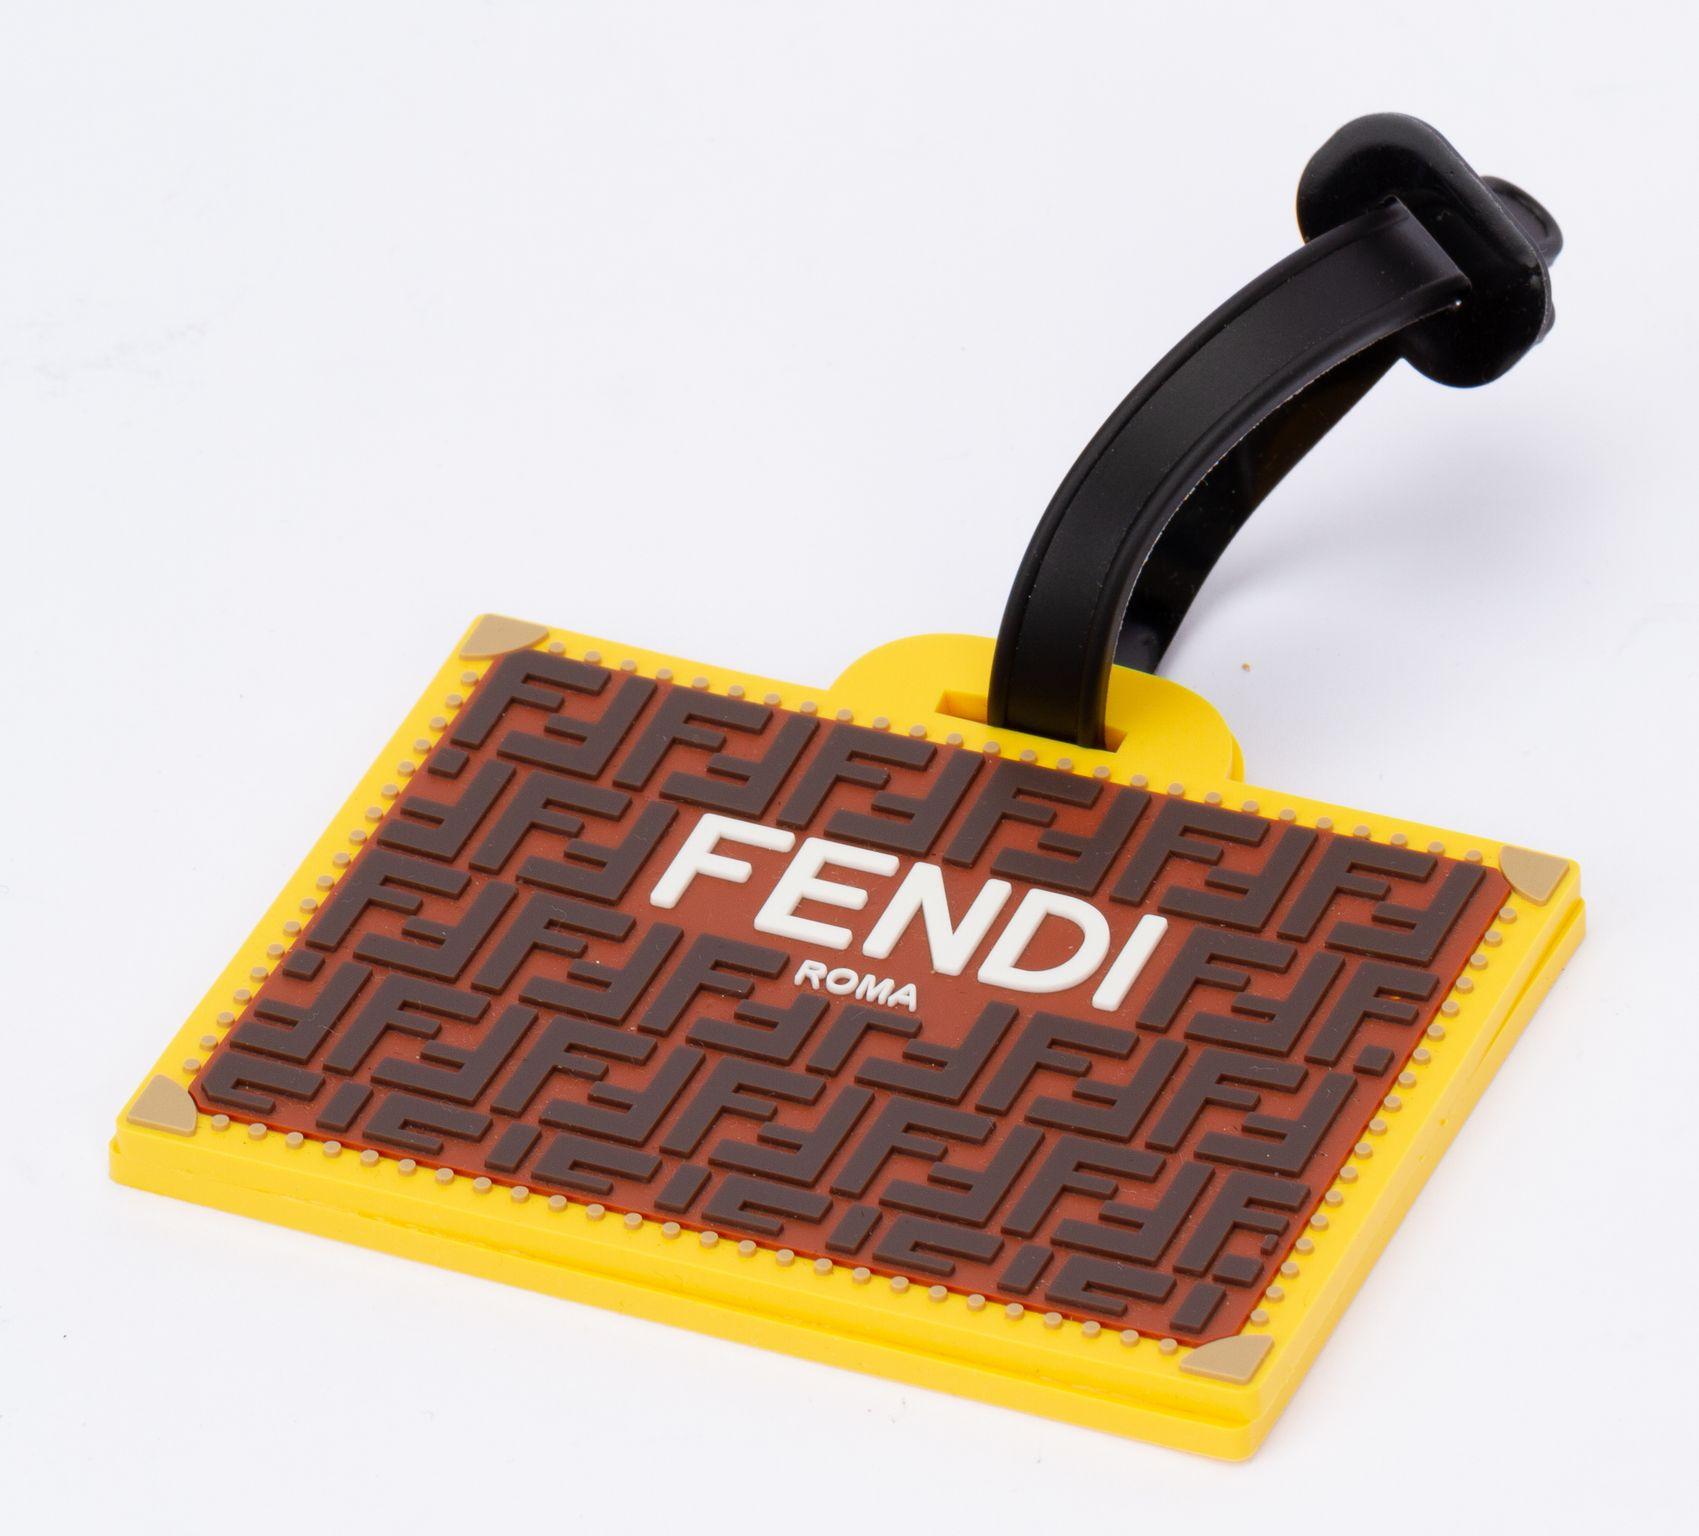 Fendi luggage tag made of silicon. On the front of the tag Fendi is written on a FF pattern in orange and brown. On the bag it's see thru and an information card is shown. The piece is new and it comes in a original dust cover.